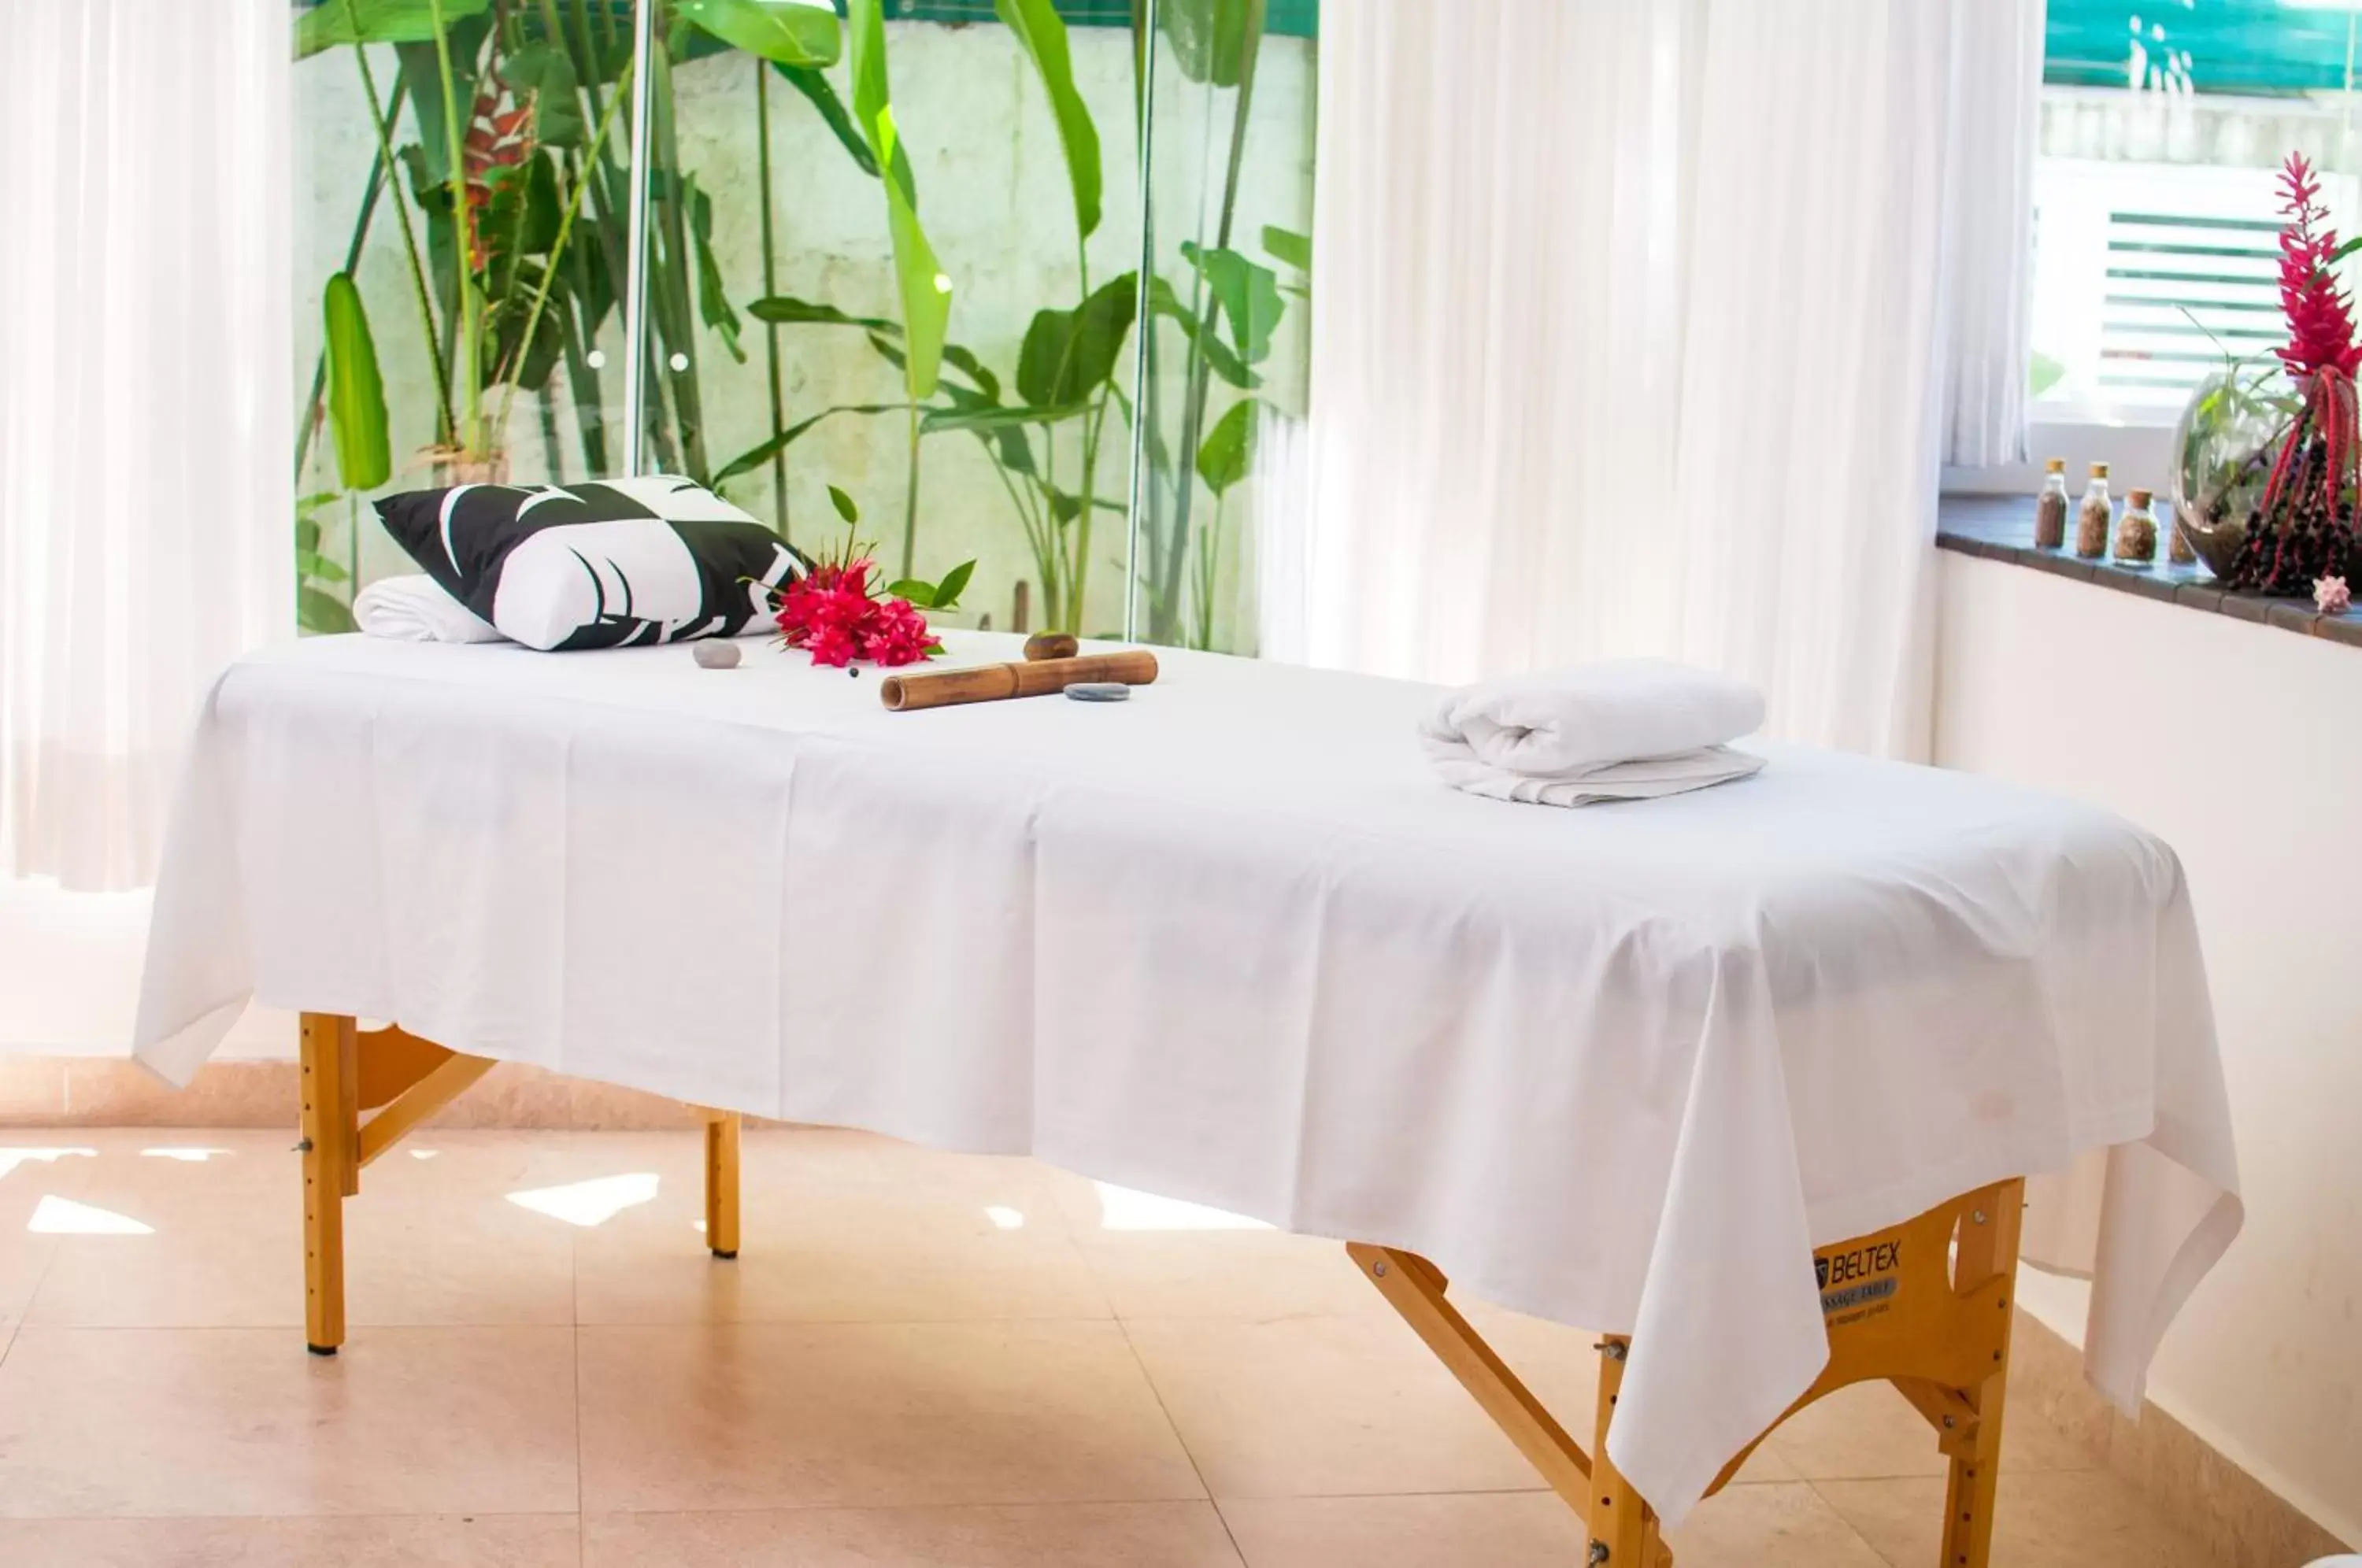 Spa and wellness centre/facilities, Spa/Wellness in Hotel Port Louis